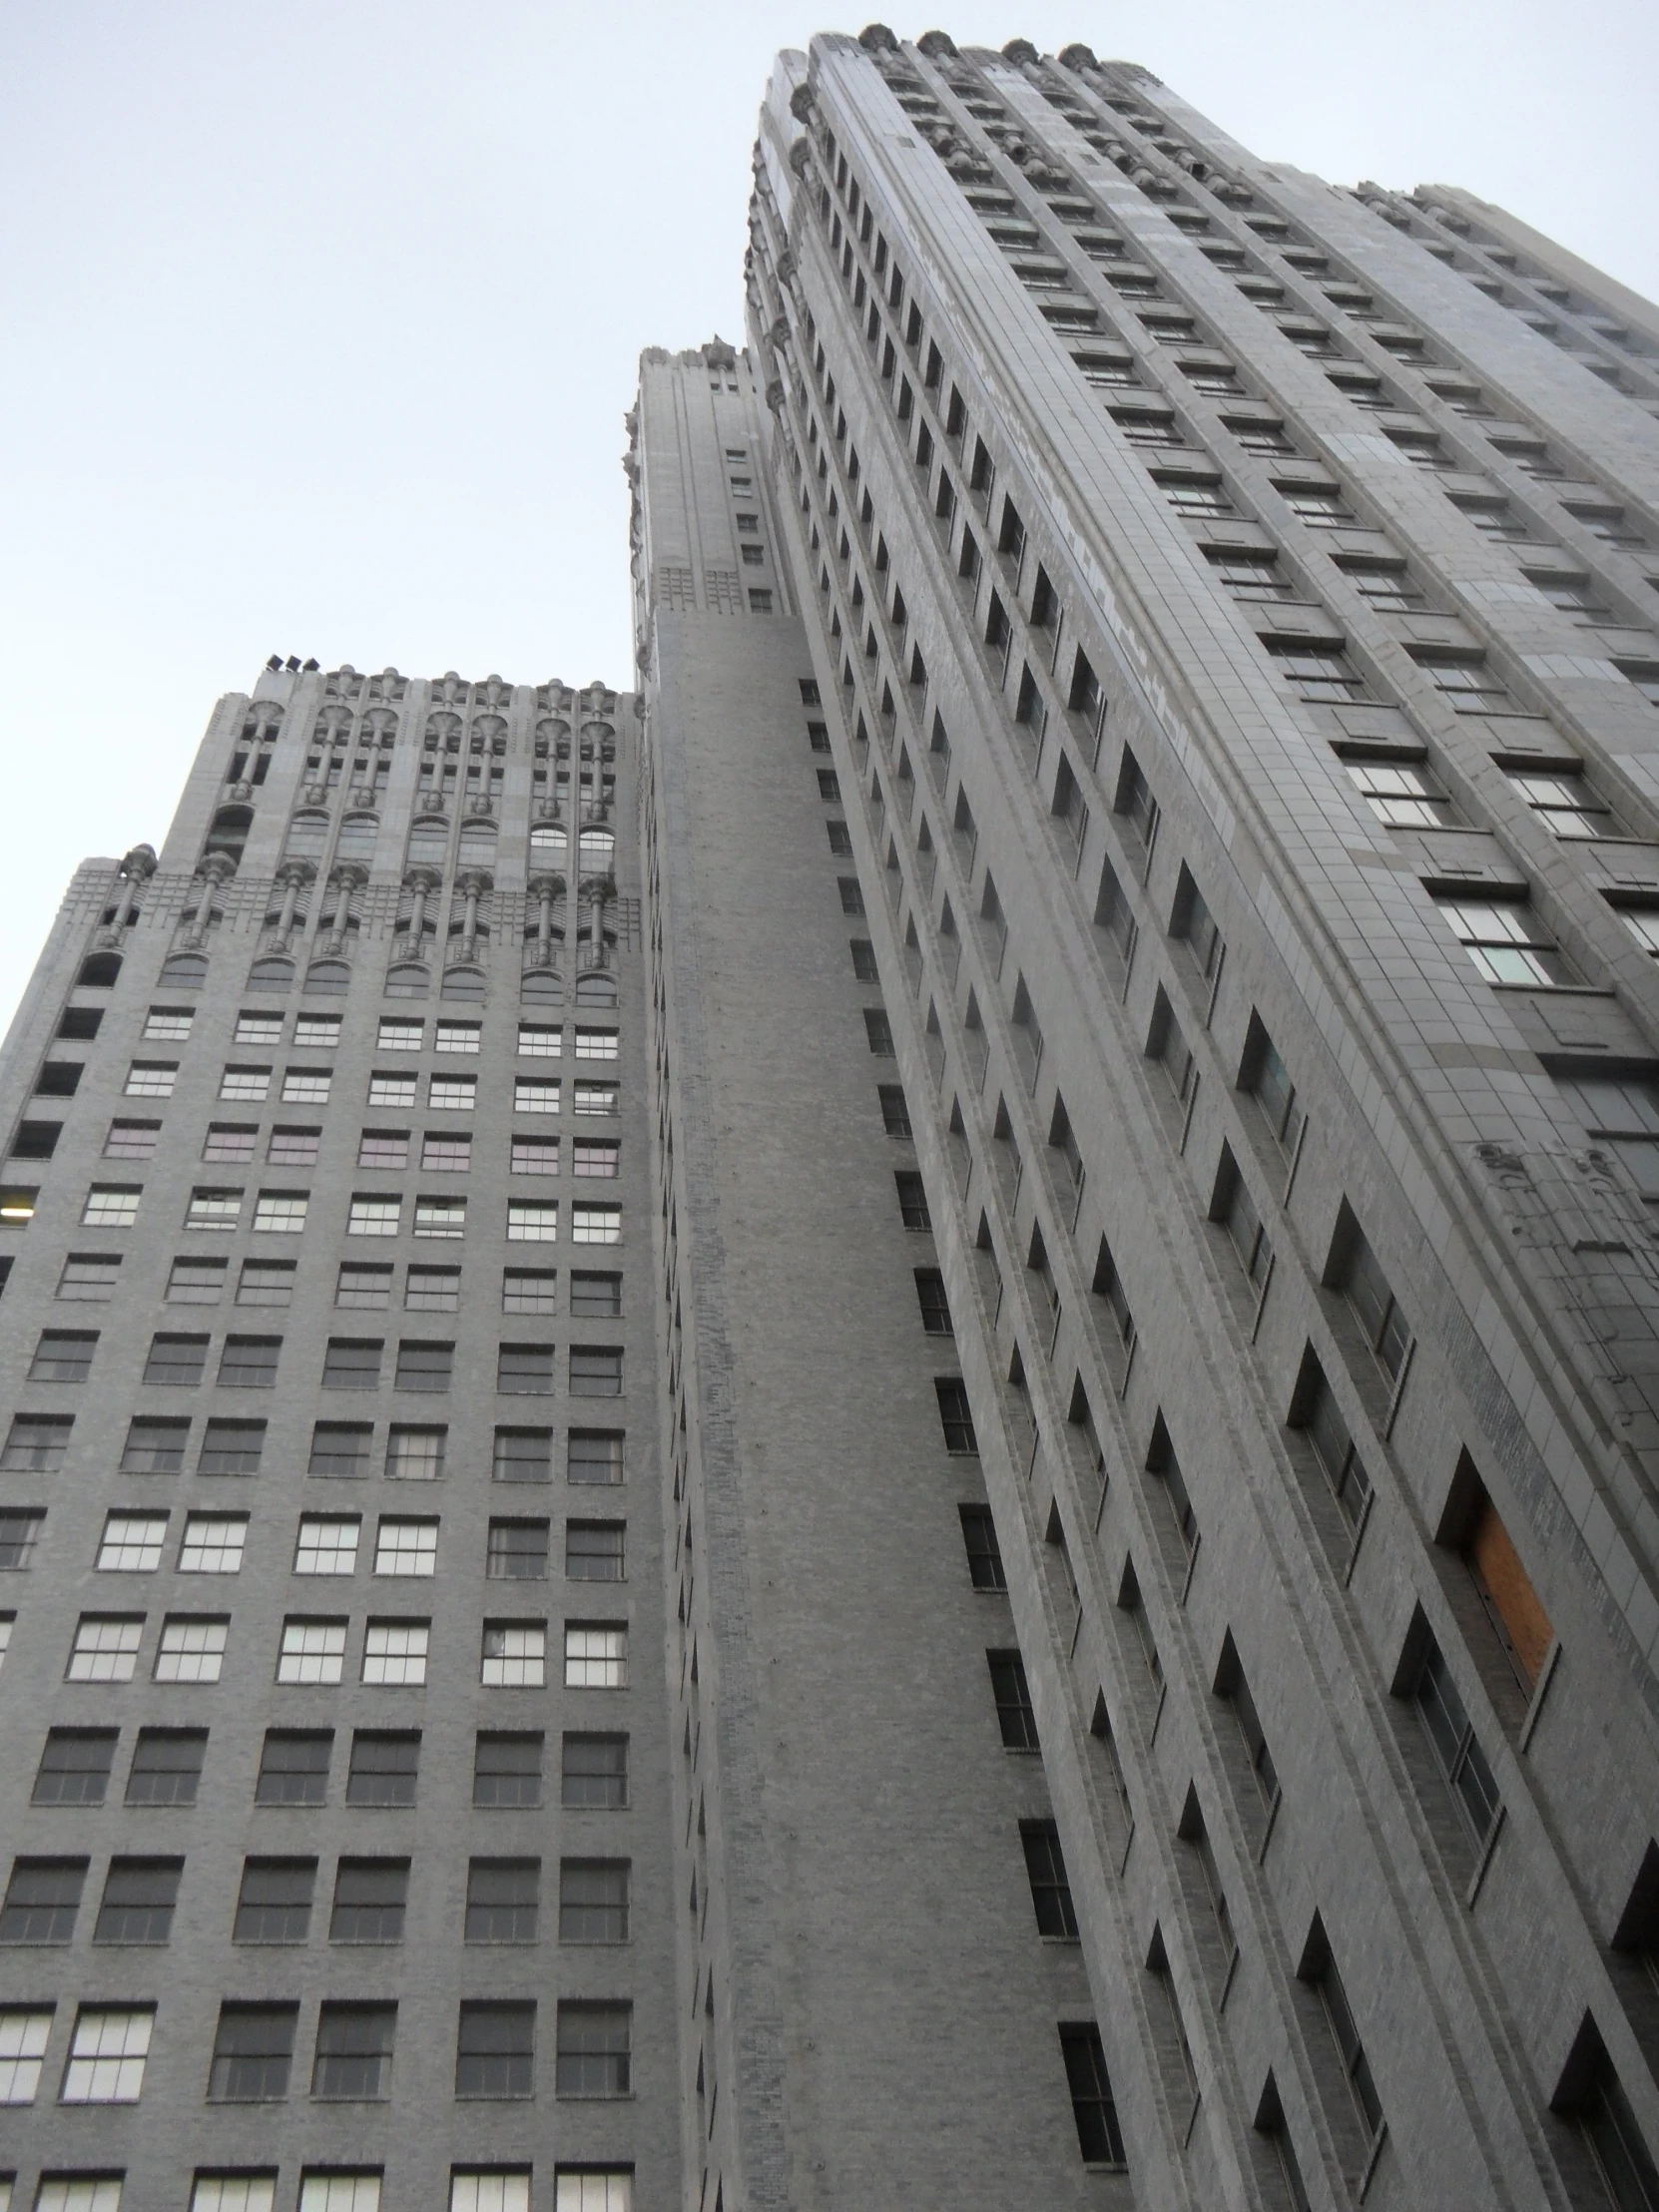 an image of an urban building as seen from the ground